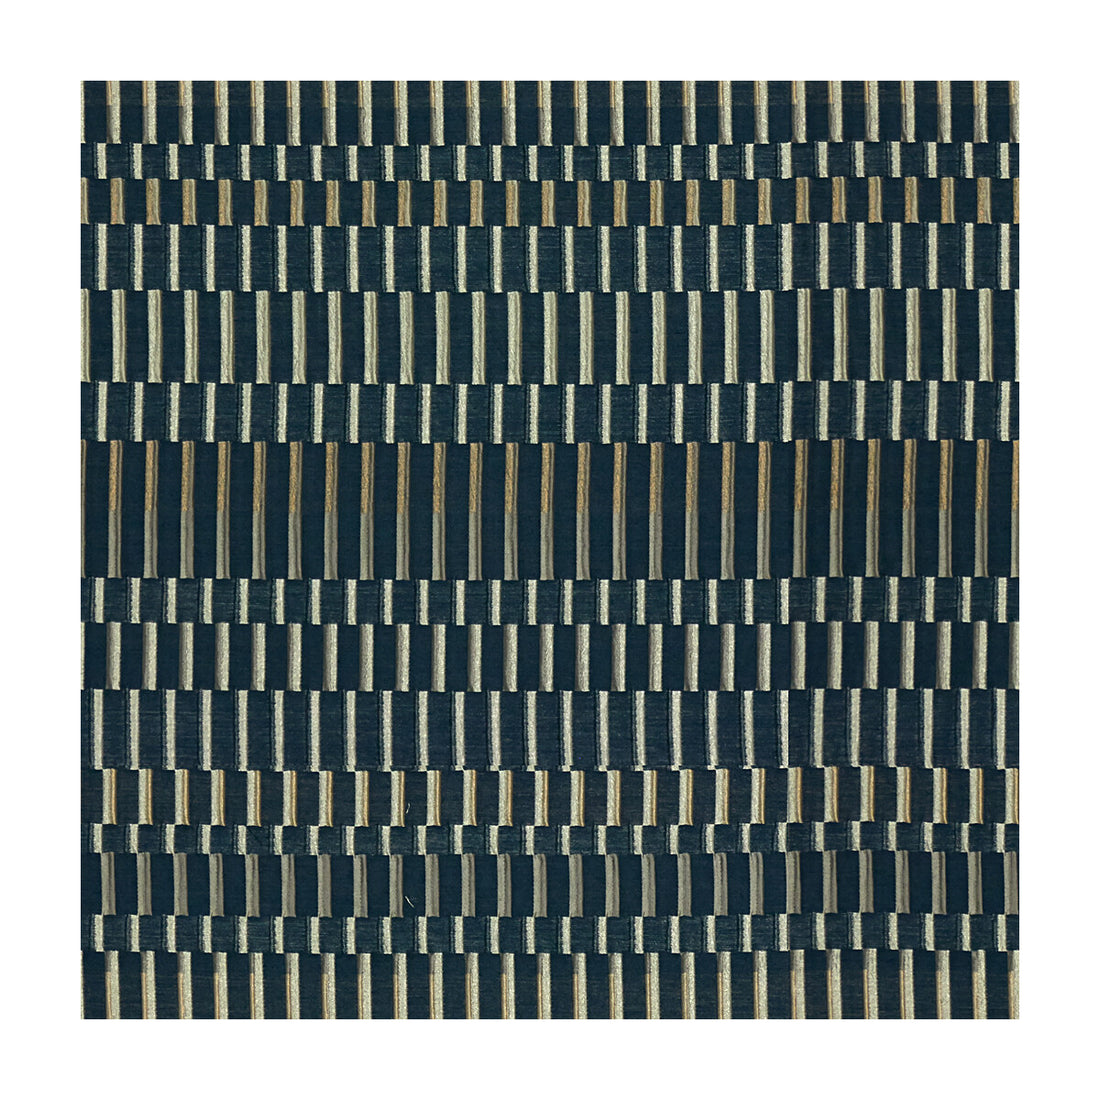 Multi Mania fabric in navy color - pattern 3672.50.0 - by Kravet Couture in the Modern Luxe II collection